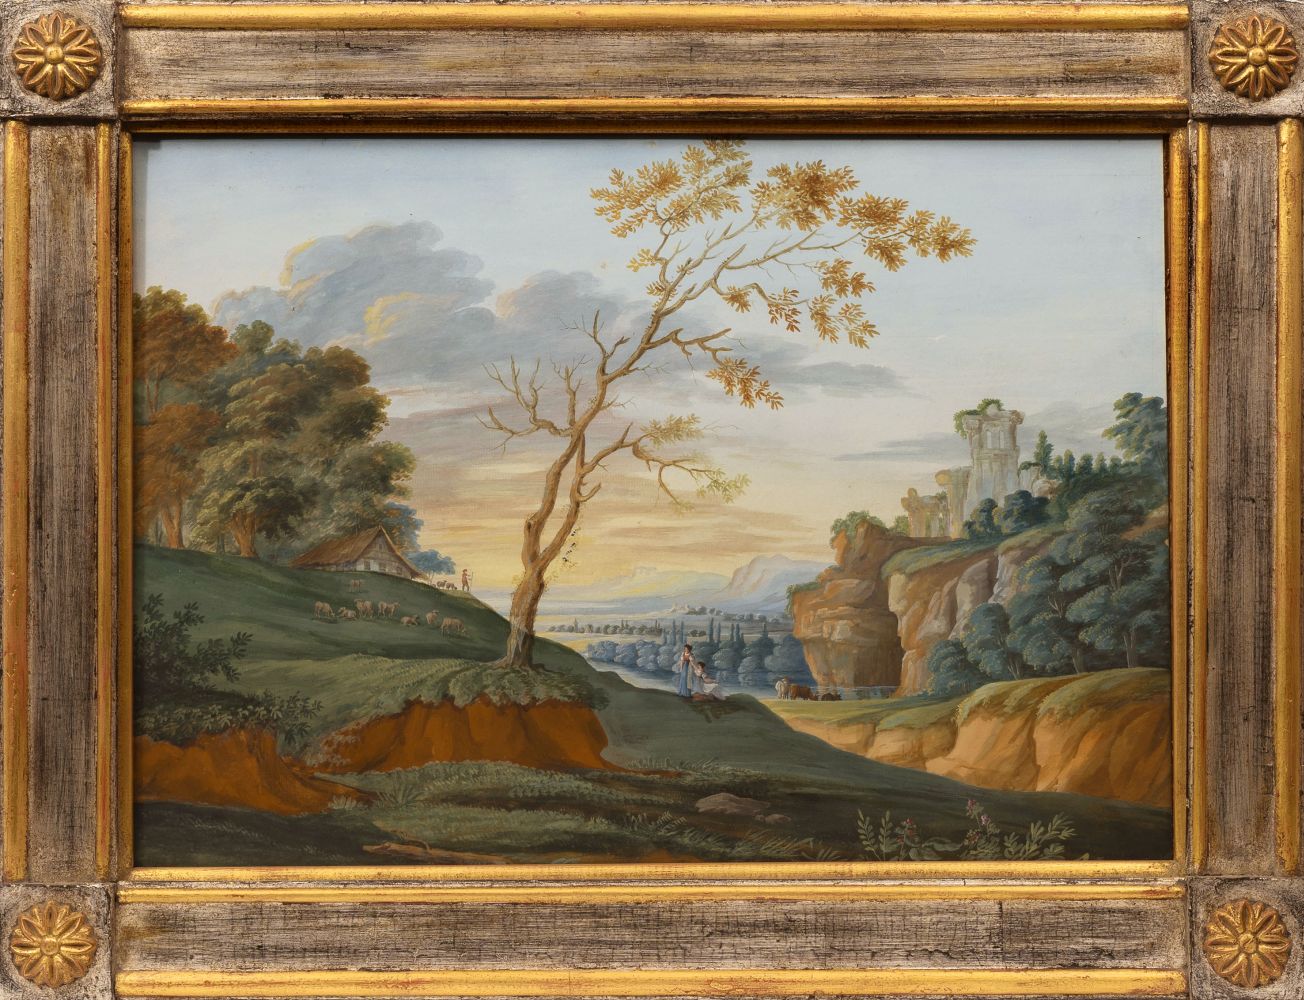 German Master active 19th cent. Companion Pieces: Neoclassical Landscapes. - Image 2 of 4